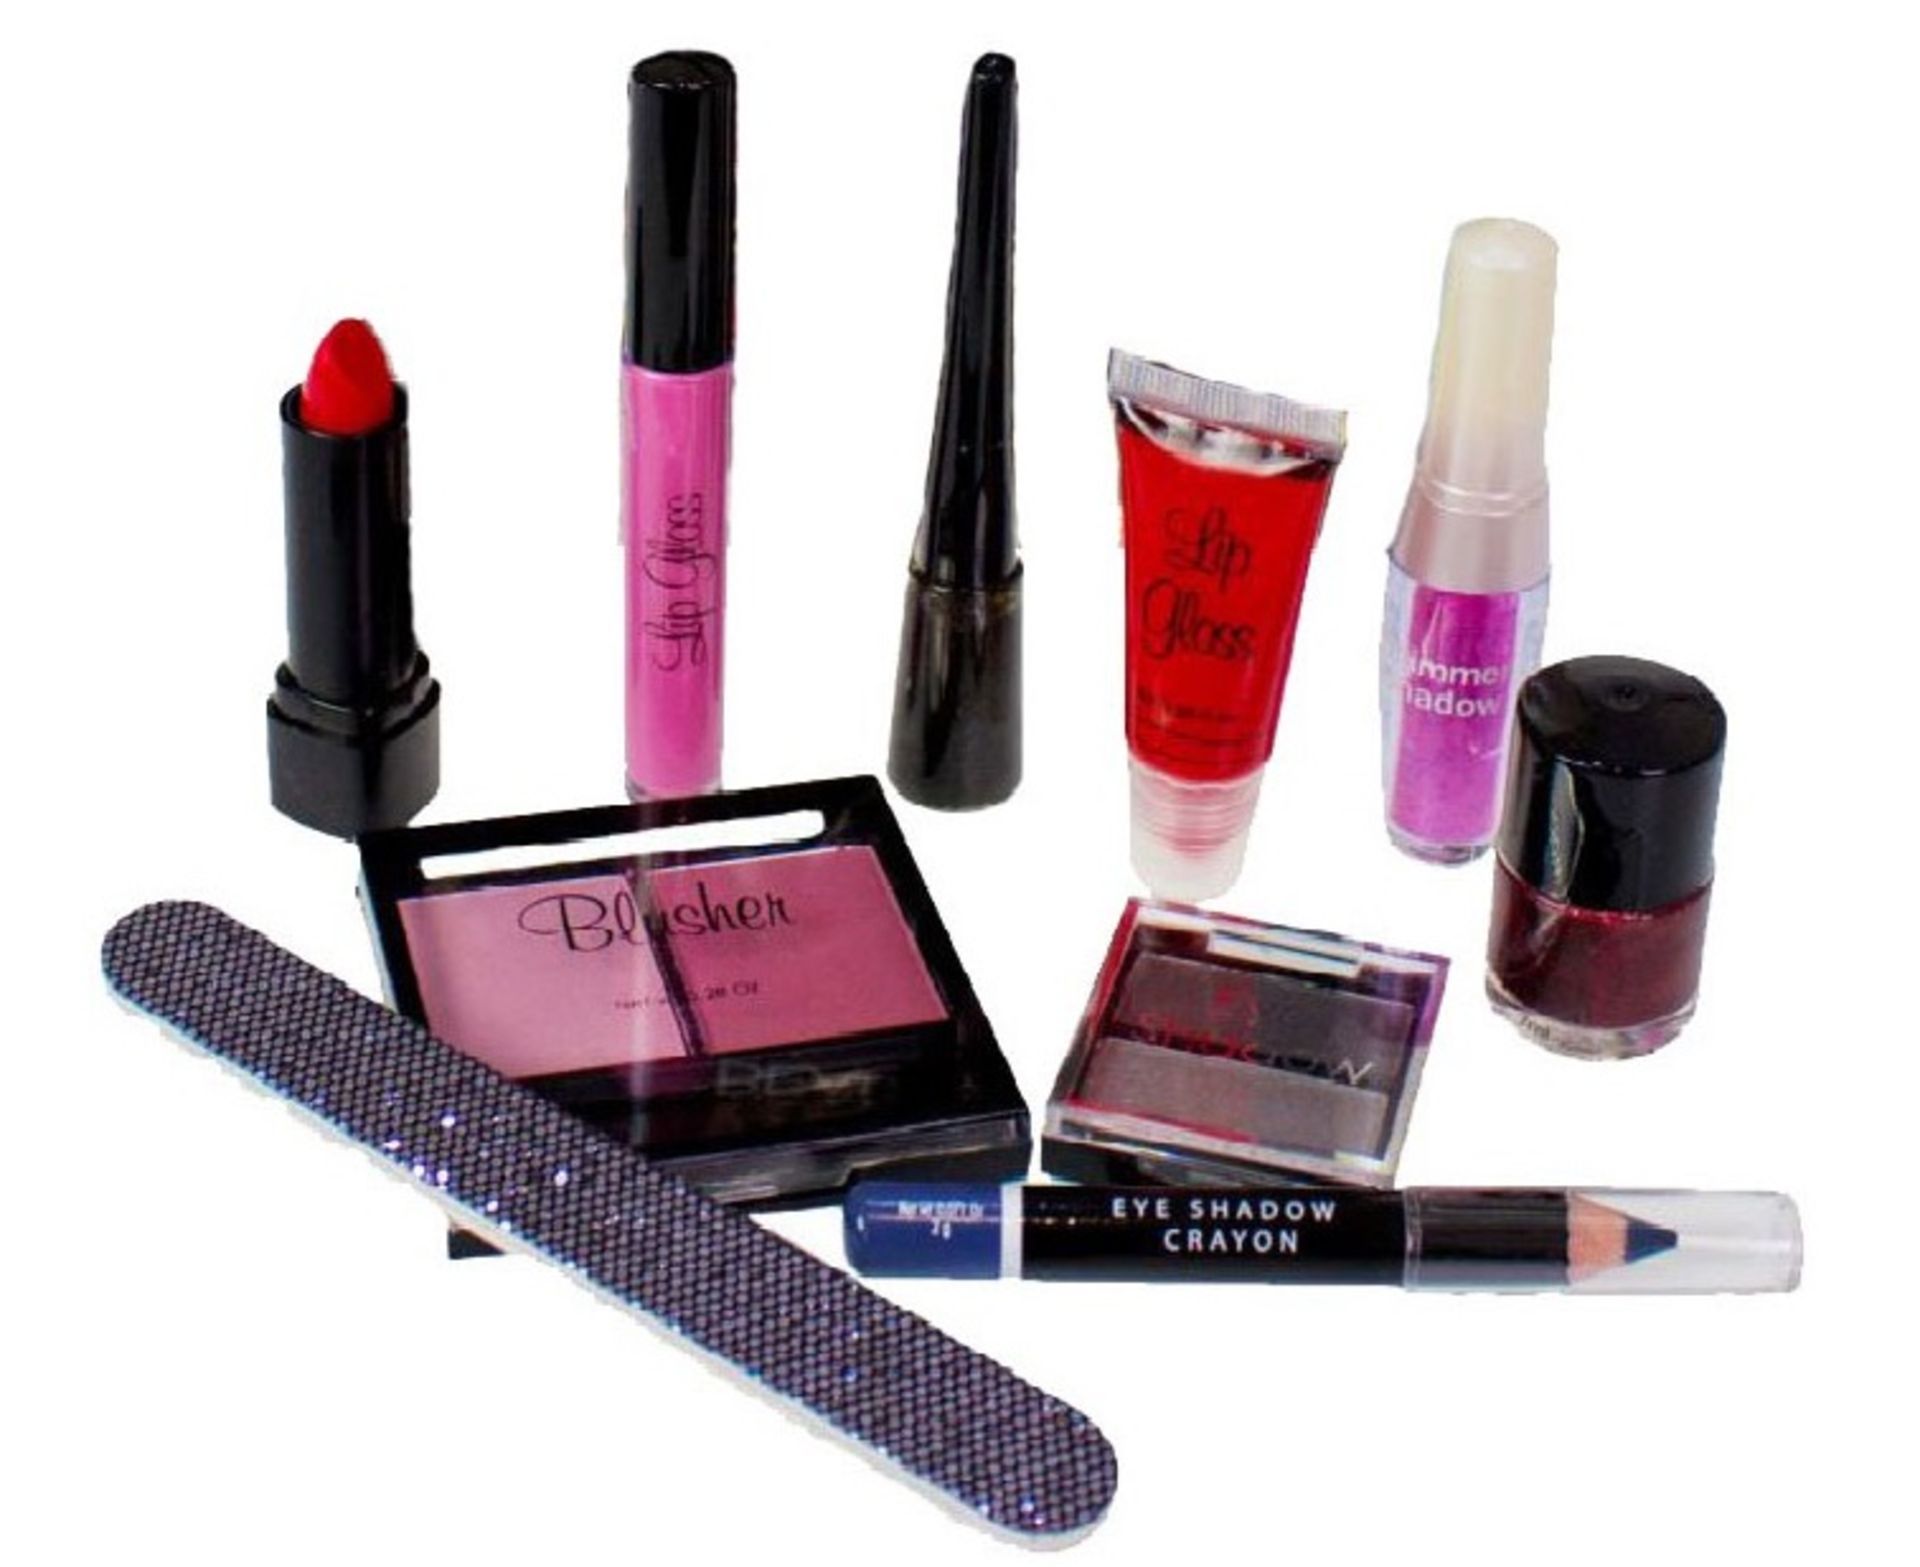 V *TRADE QTY* Brand New Ten Beauty Product Selection in Gift Bag (Contents vary) X 50 YOUR BID PRICE